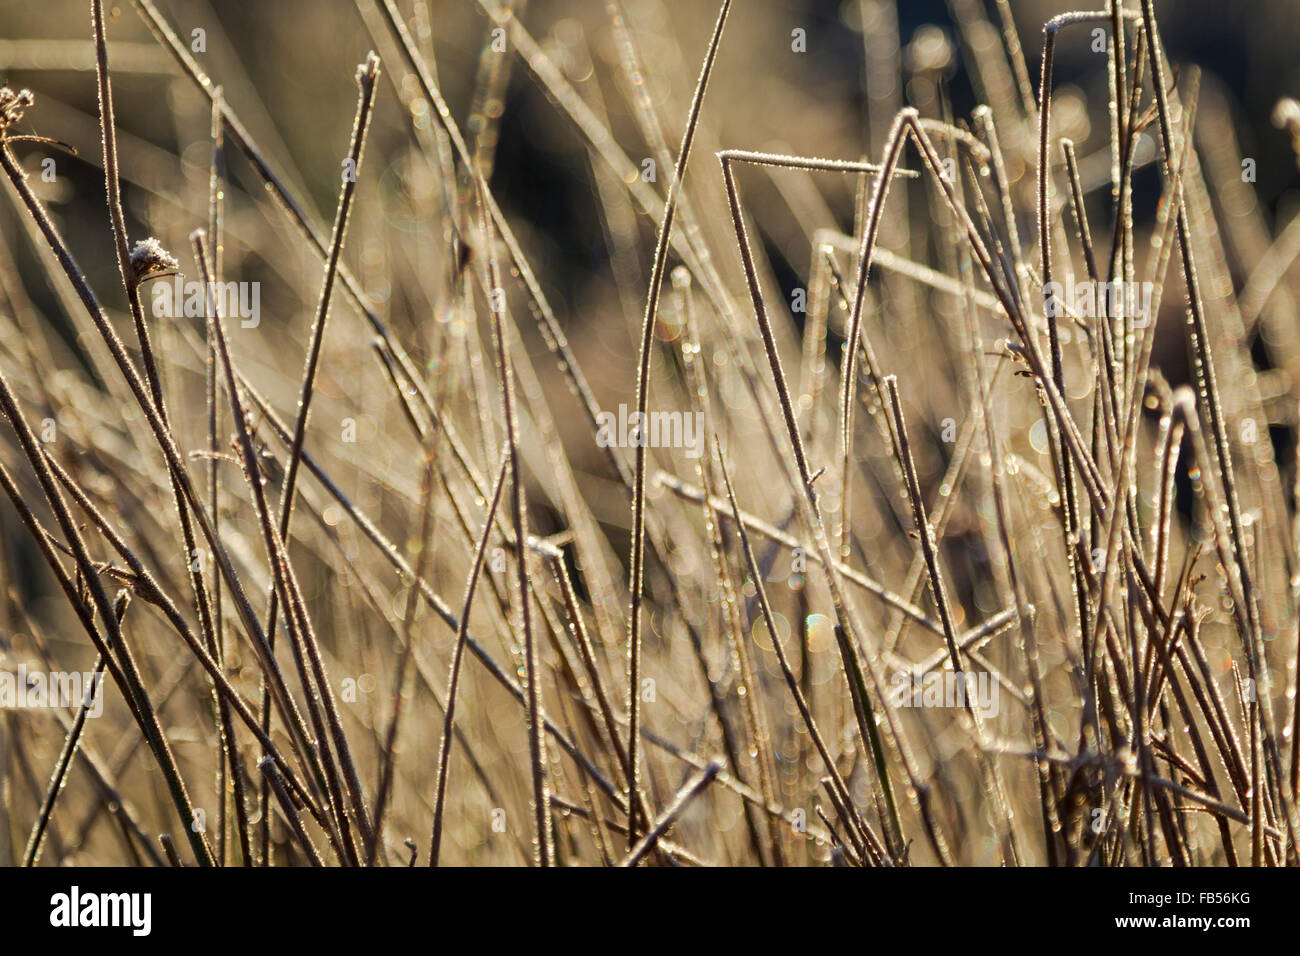 Frost covered stalks of rough grass backlit by early morning sunlight Stock Photo